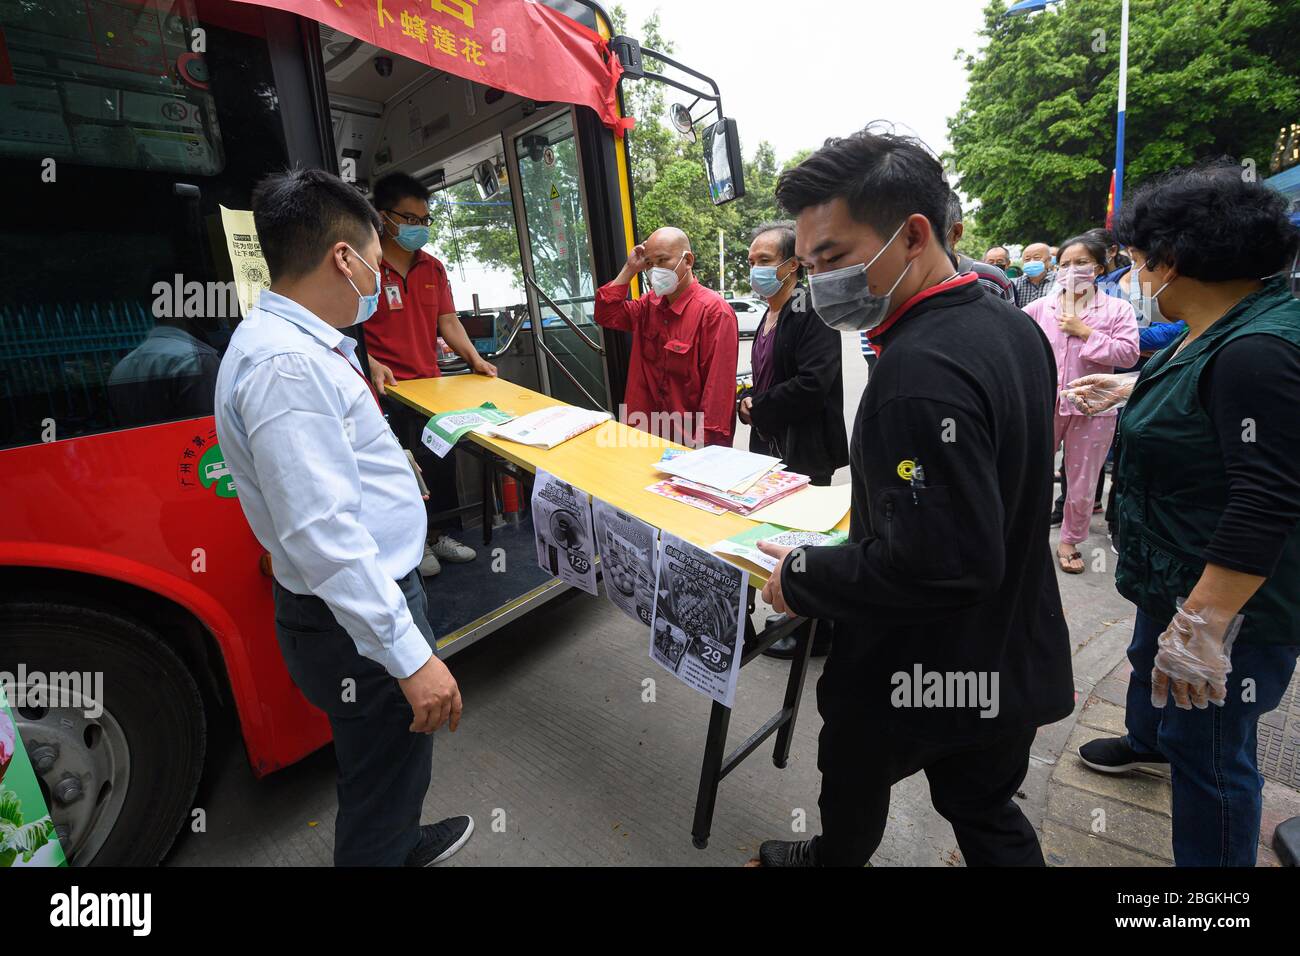 Staff prepare for the opening of the bus supermarket which is a cooperation of local bus service and supermarket for citizens' convenience, Guangzhou Stock Photo